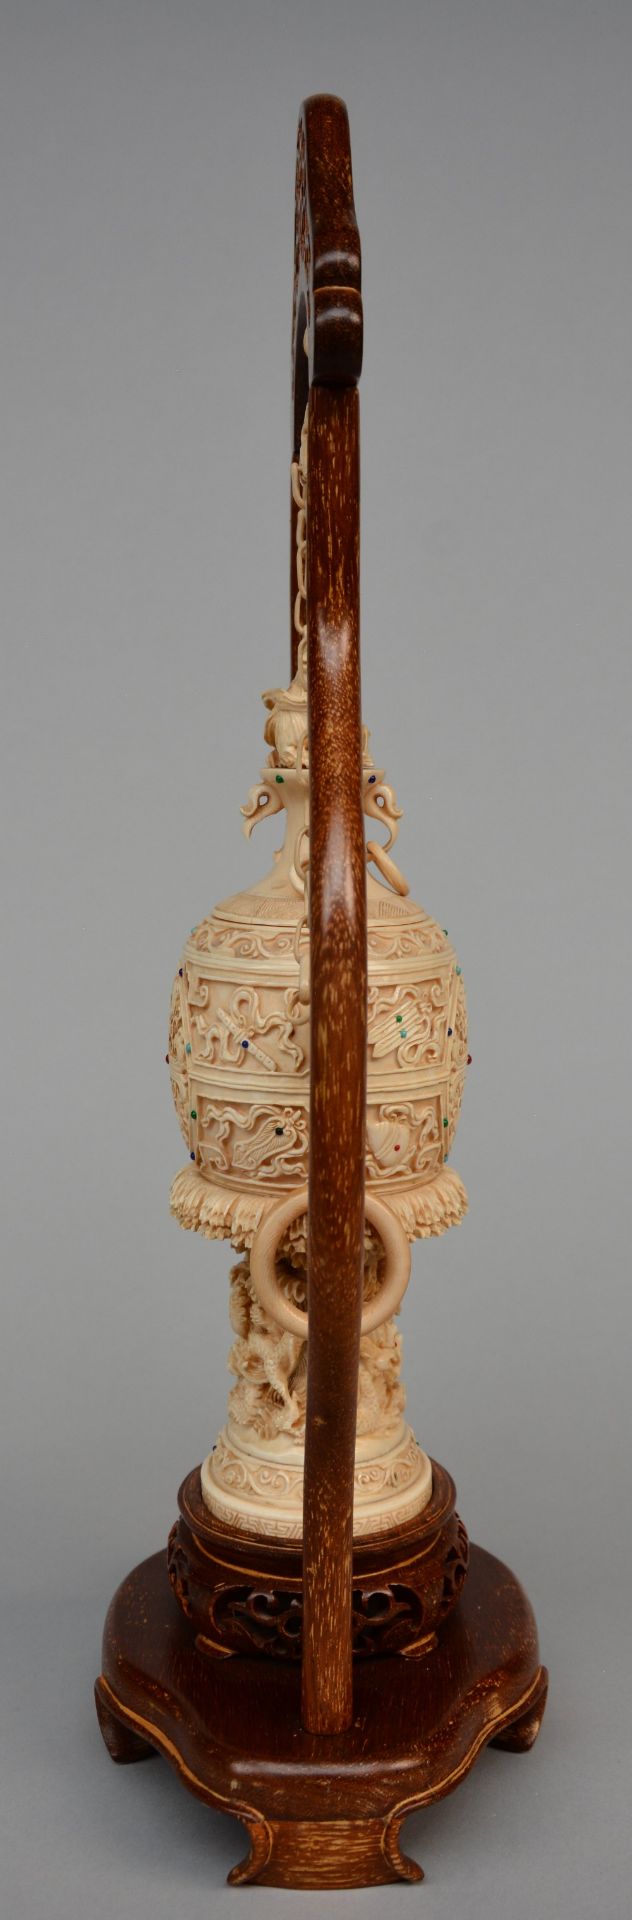 A Chinese ivory vase with cover with relief decoration of dragons, inlaid with various precious - Image 4 of 10